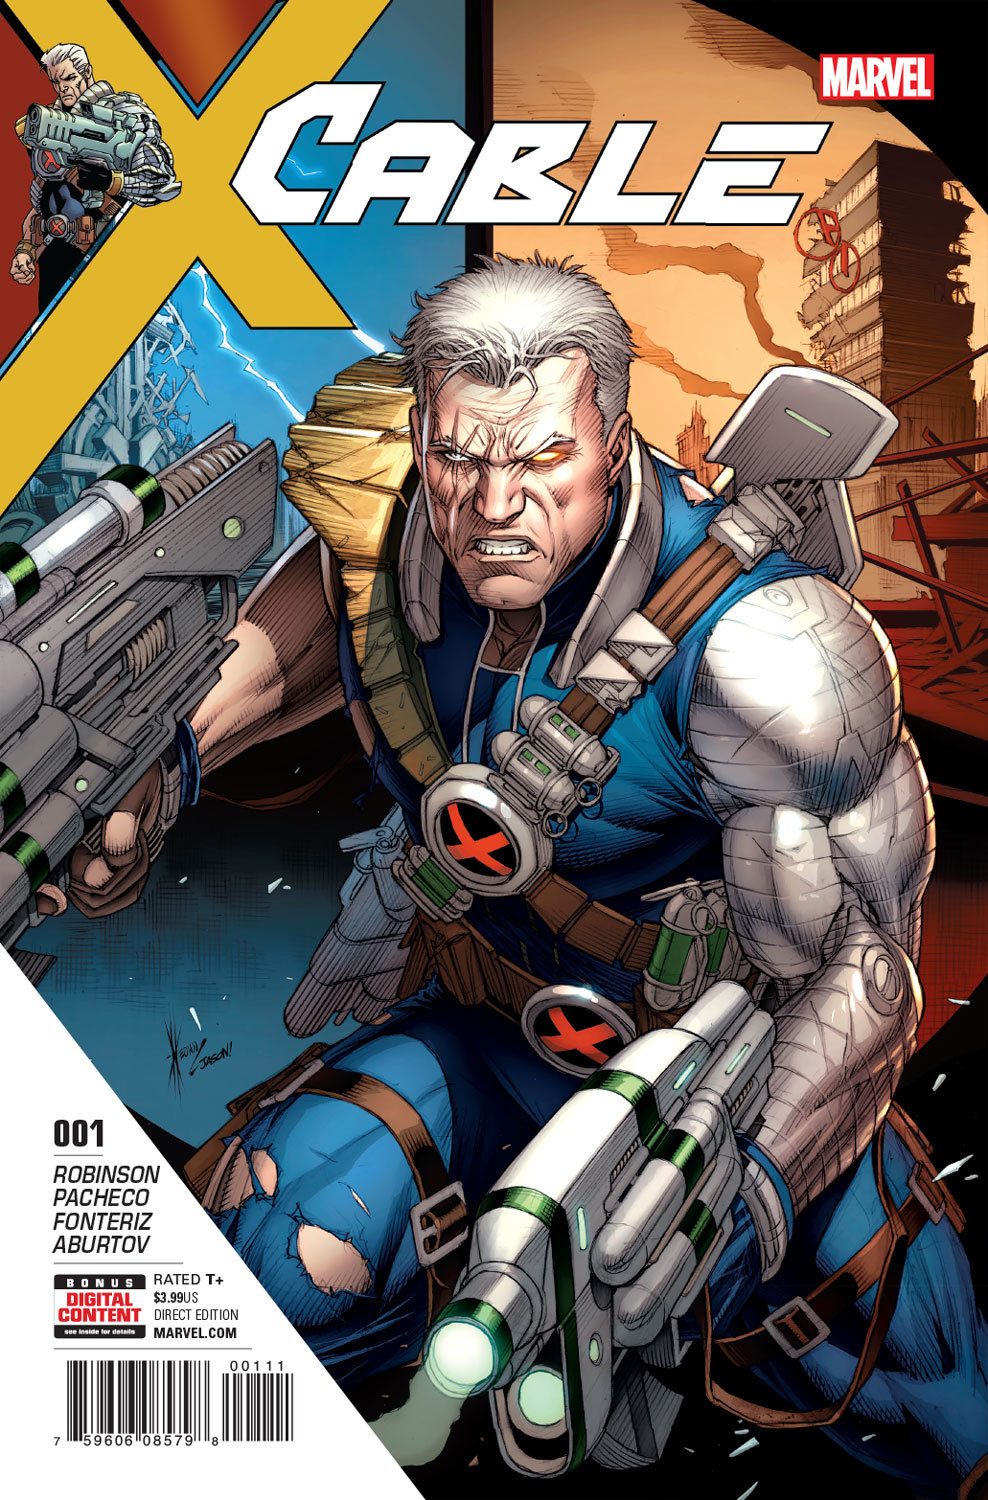 Marvel Comics News Digest 5/1 – 5/5/17 Featuring Cable and Secret Empire